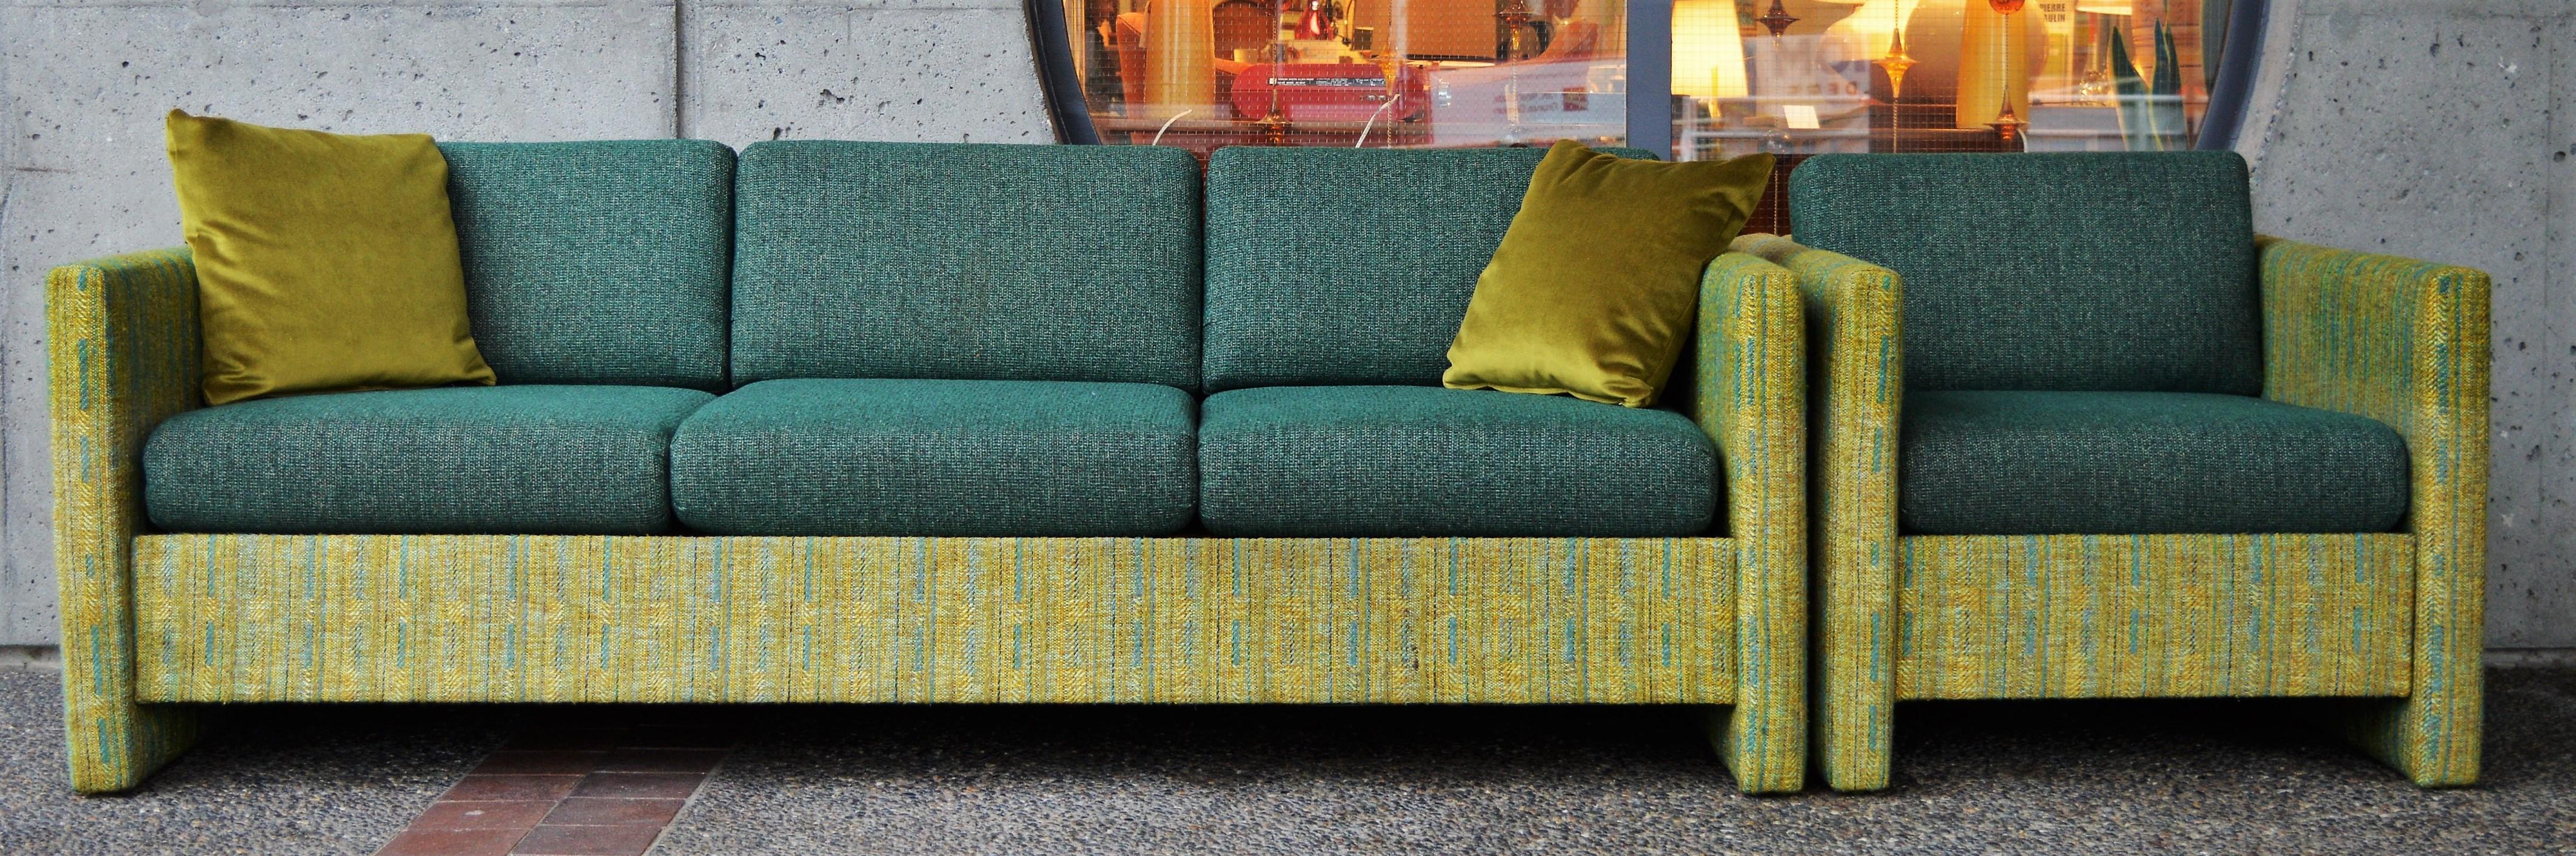 Midcentury Sofa and Club Chair in Teal Wool Cushions with Contrasting Print 5